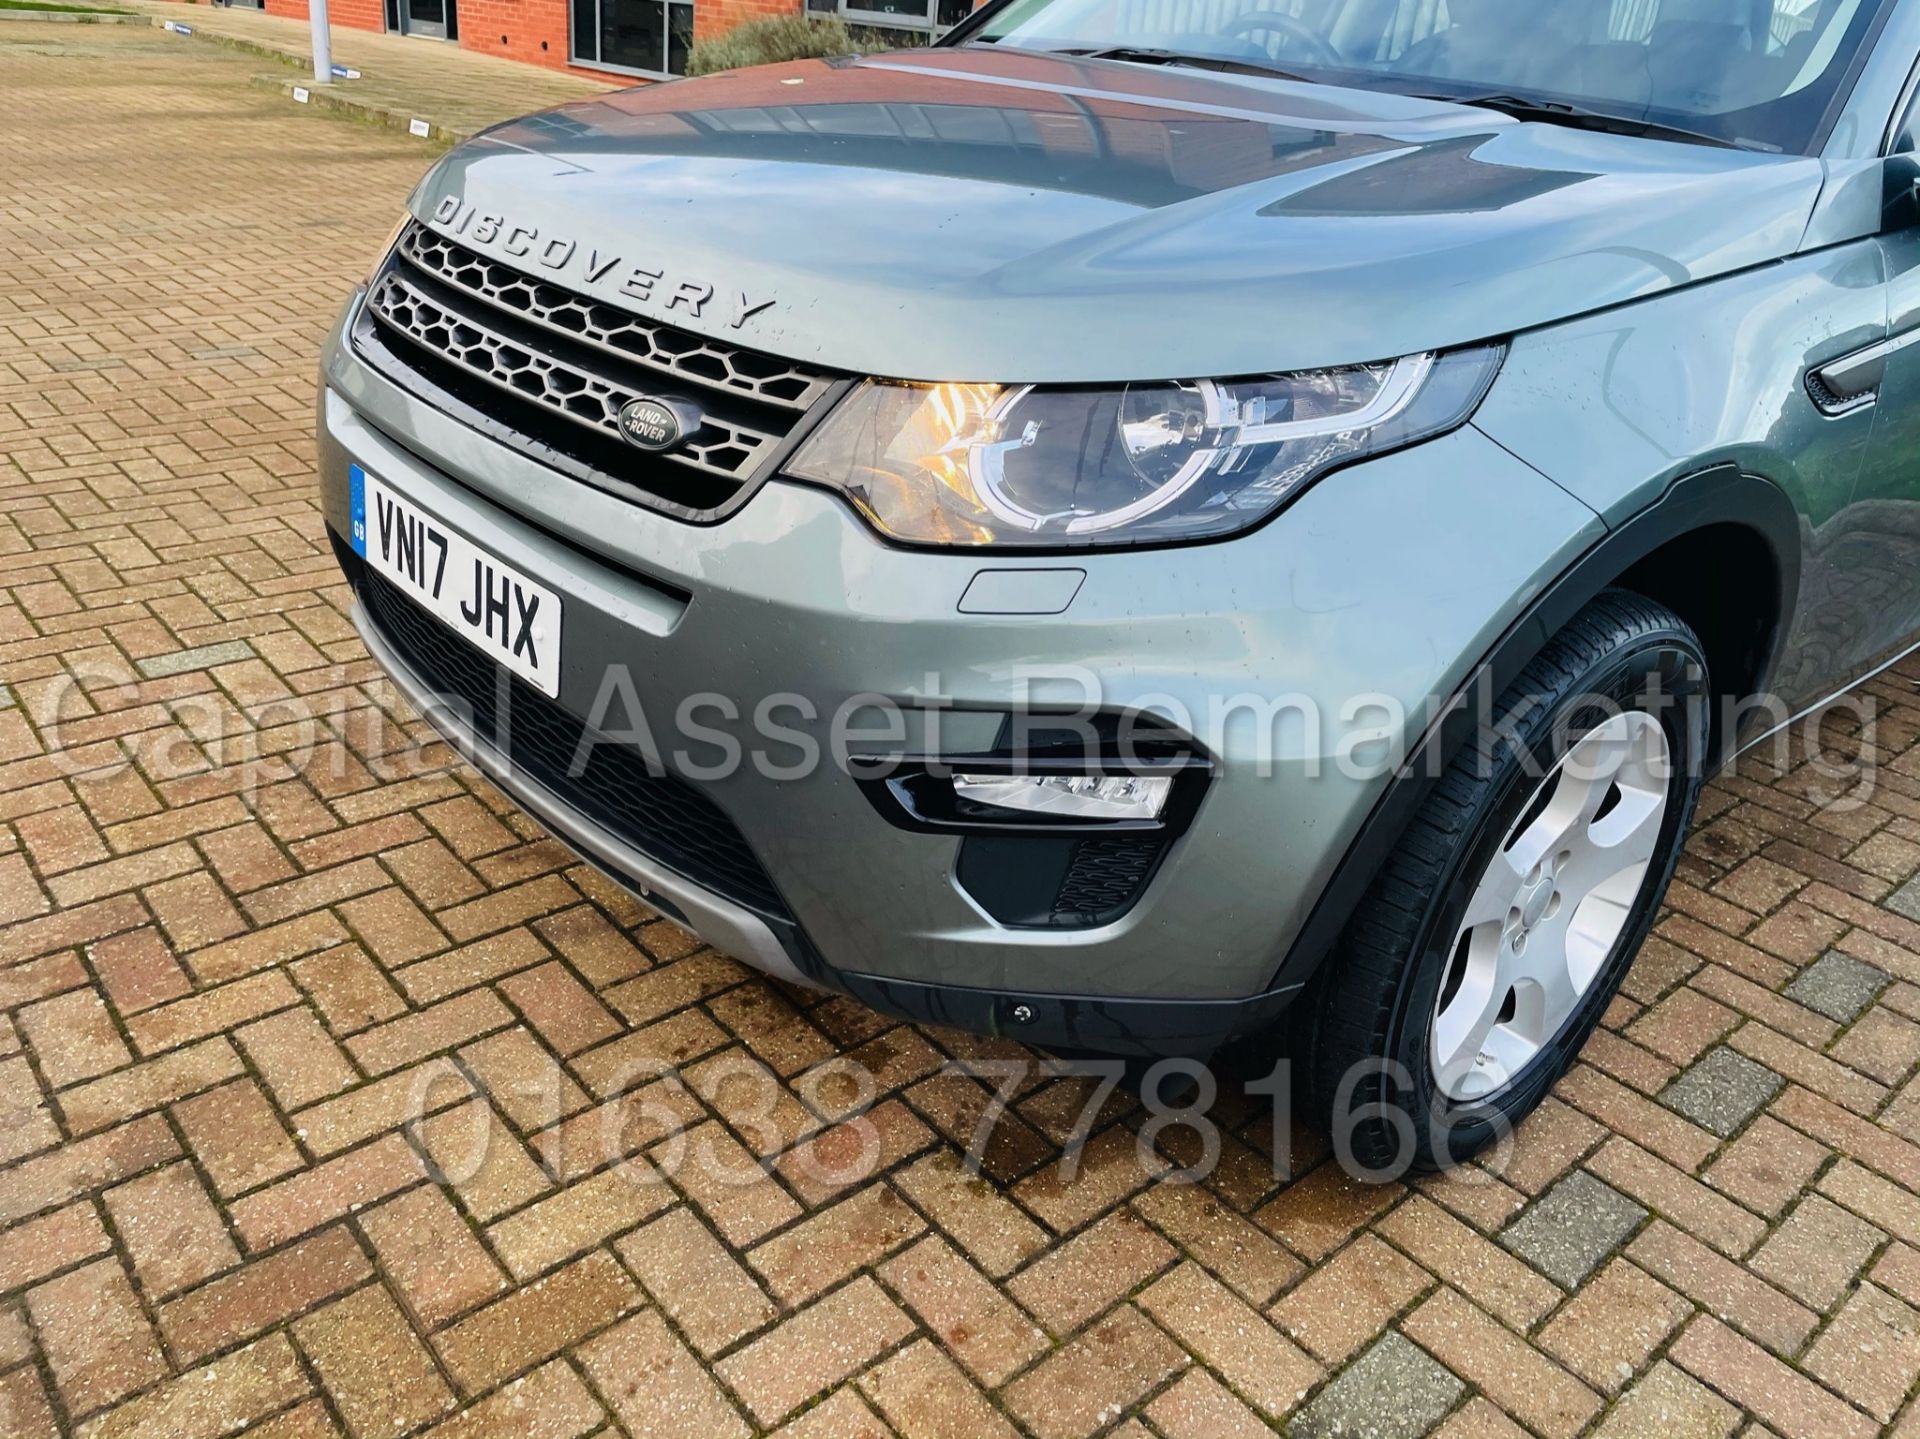 (On Sale) LAND ROVER DISCOVERY SPORT *SE TECH* SUV (2017) '2.0 TD4 - STOP/START' (1 OWNER FROM NEW) - Image 16 of 50